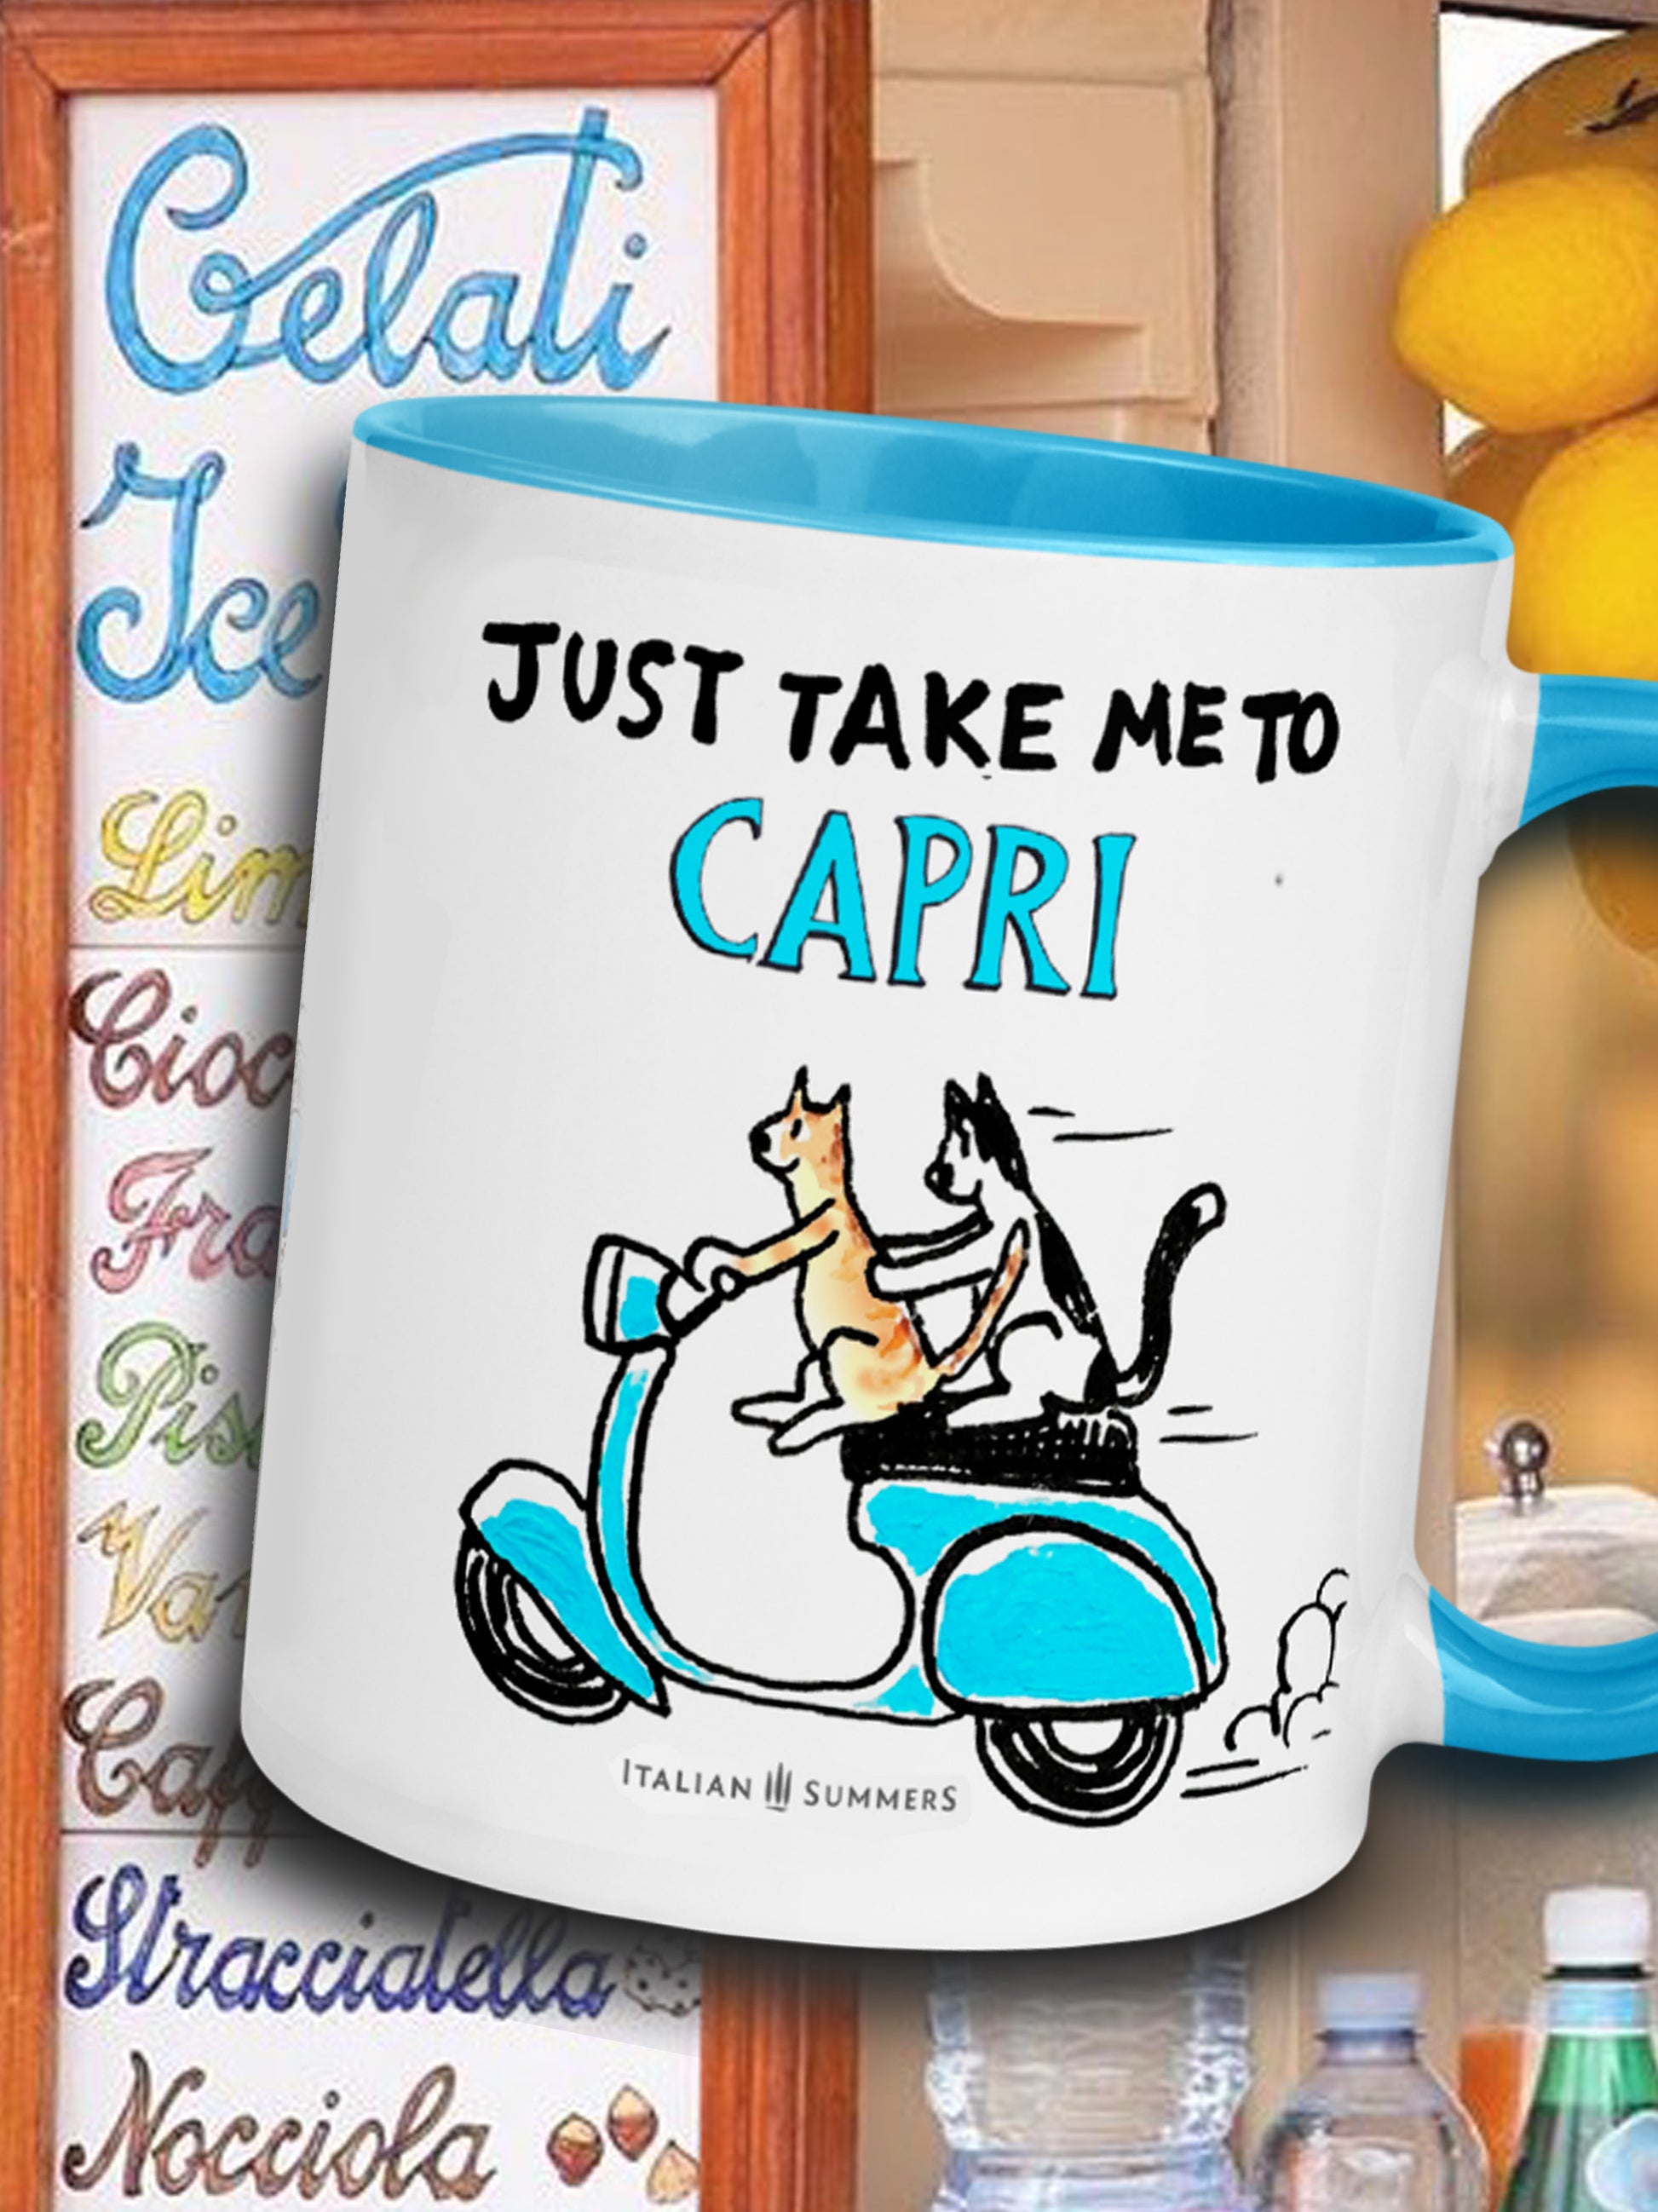 An Italy inspired coffe mug with the text Just take me to Capri. With a sketch of two cats driving an aqua blue vintage Vespa. The mug is avai;able in white or with a yellow or blue inside/handle. Made by Italian Summers